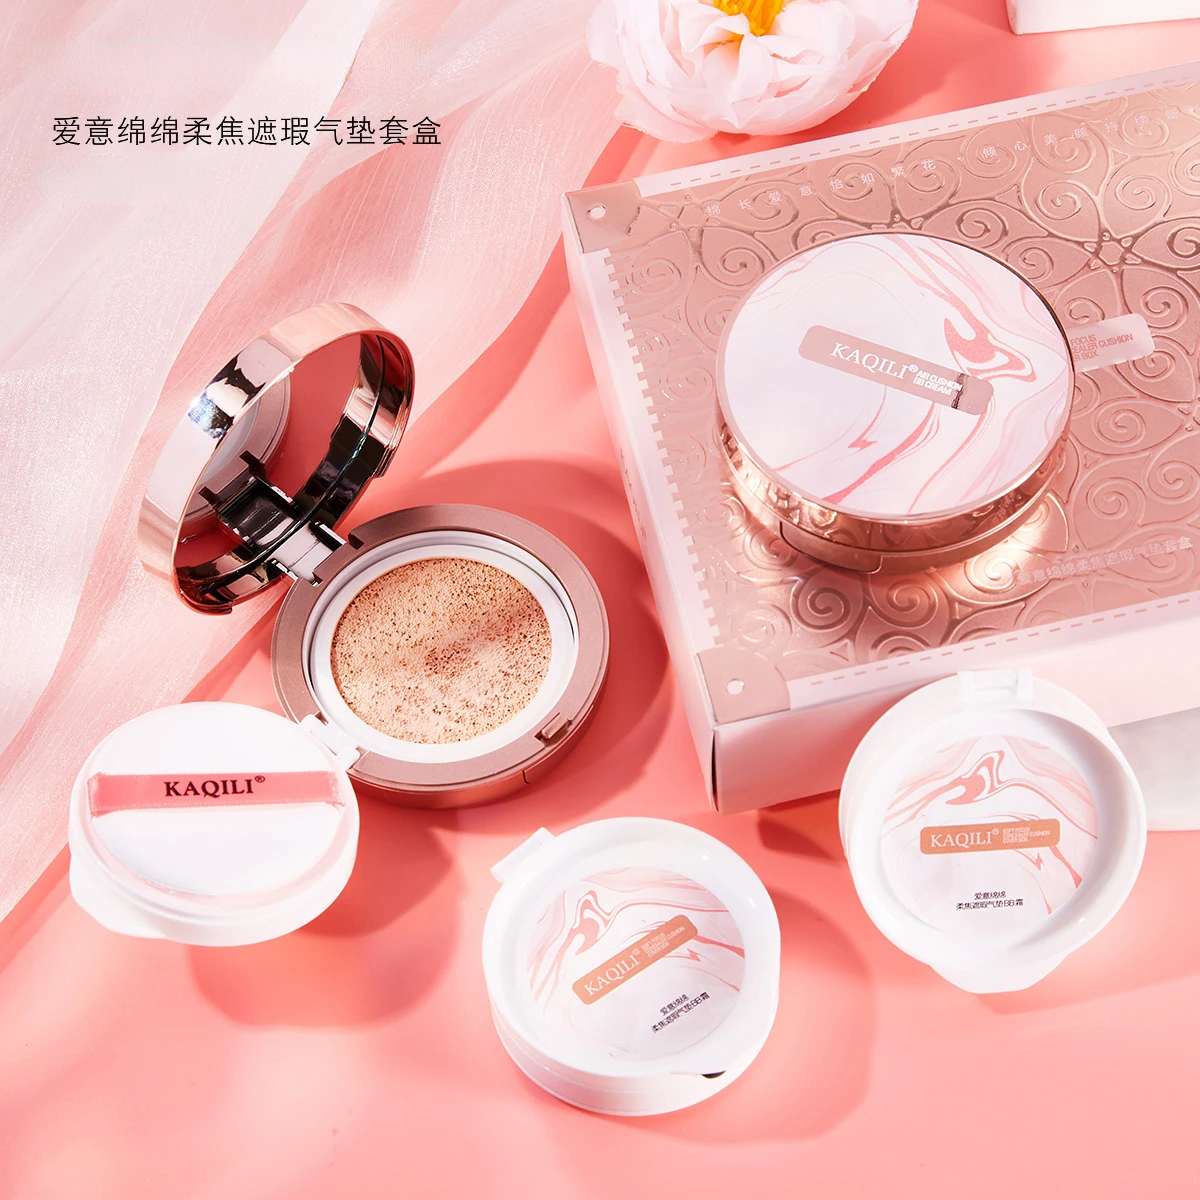 Air Cushion Box Mianmian Love Soft Focus BB Set Concealer Air Cushion Send Two Replacements Brightening Foundation Make-up